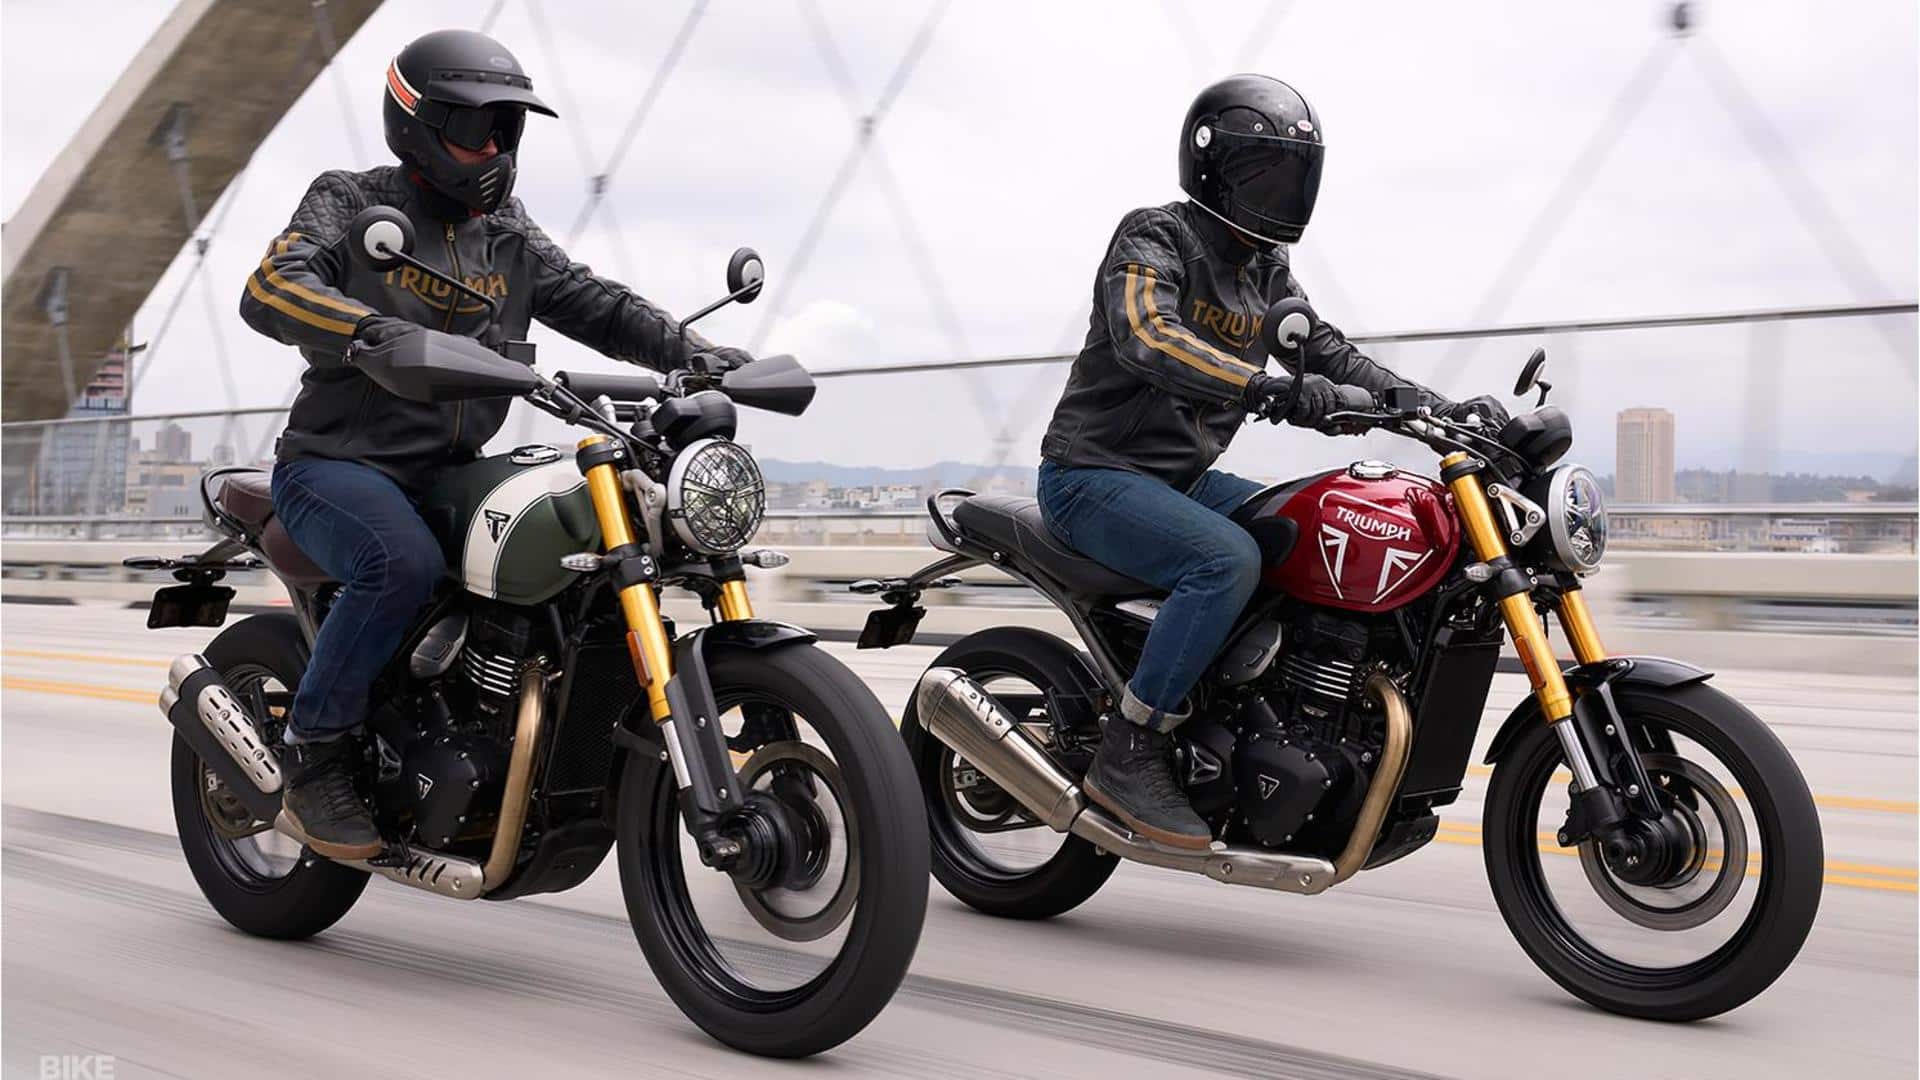 Triumph Speed 400, Scrambler 400 X motorcycles launched in India